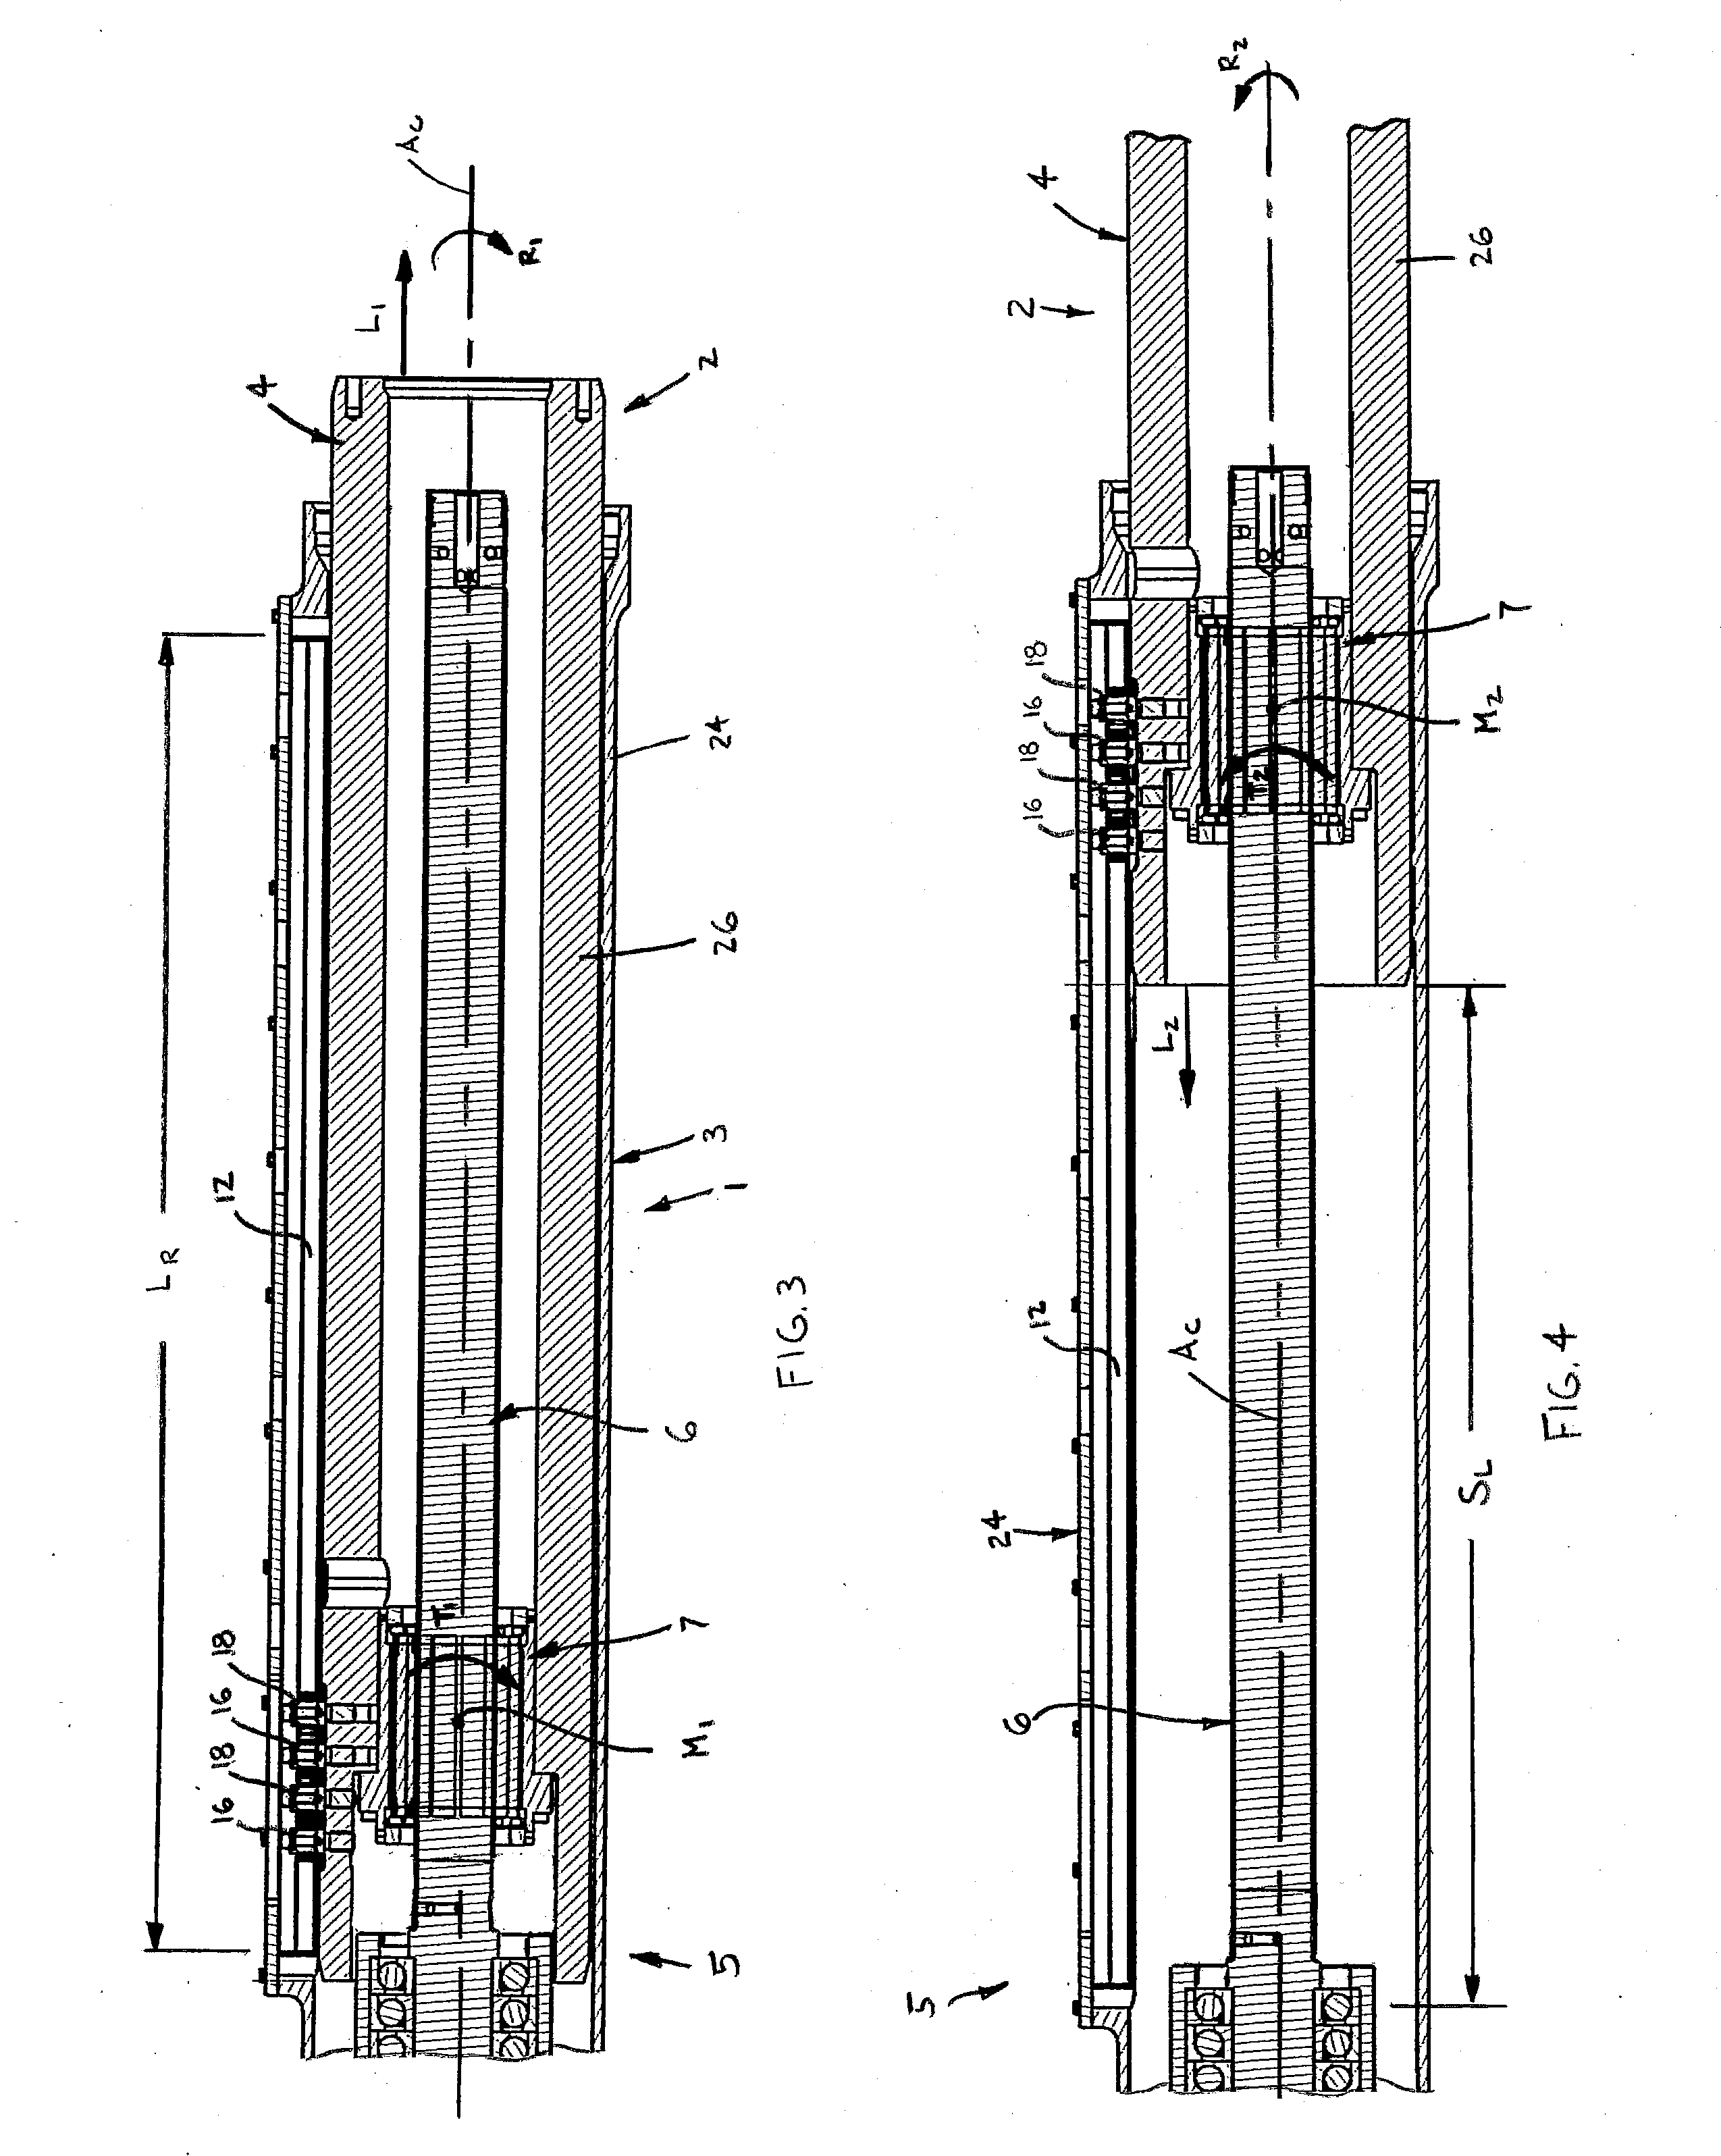 Anti-rotation device for actuators